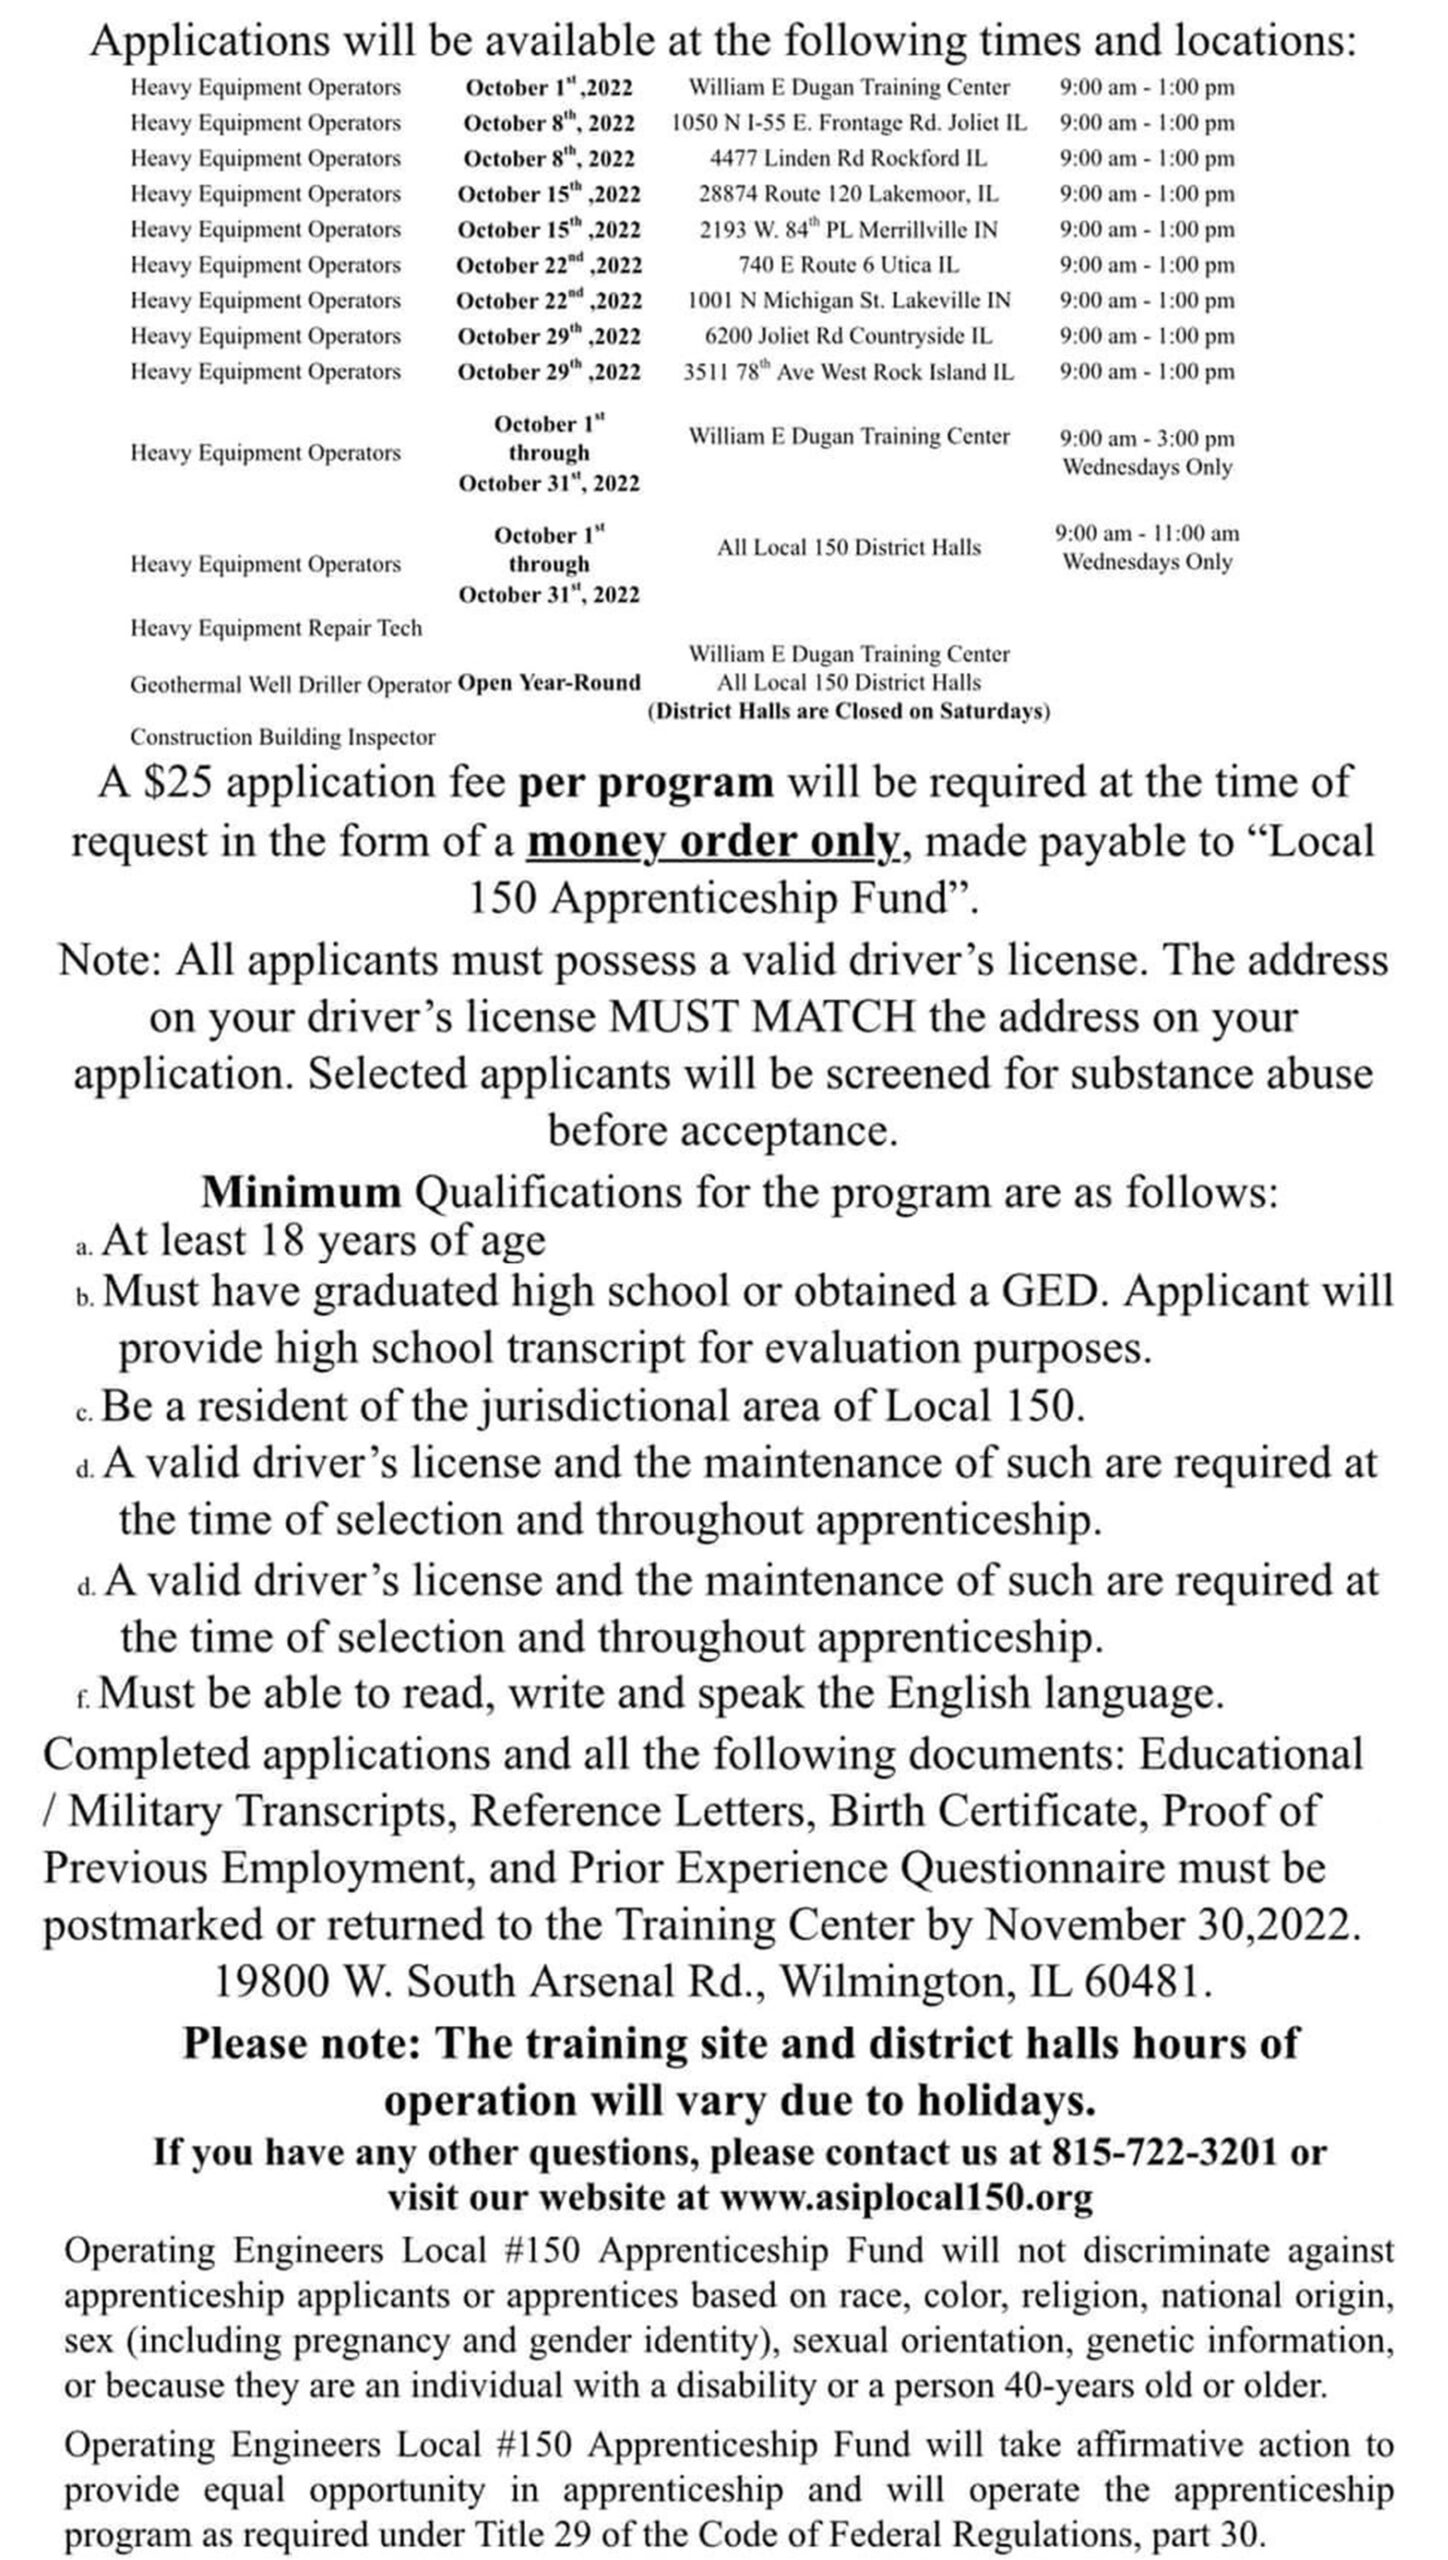 Local 150 application opportunity